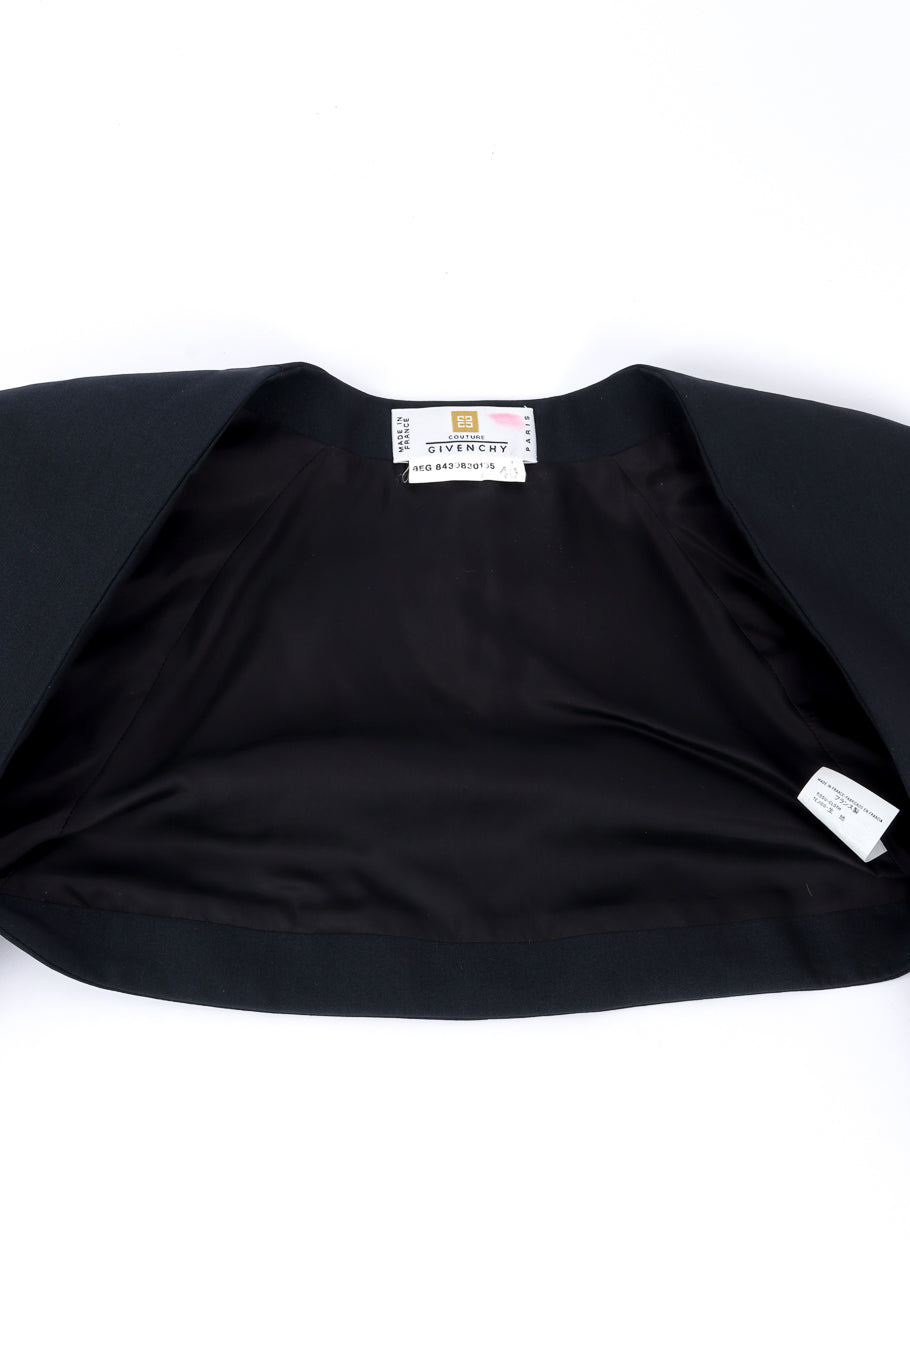 Givenchy Couture Bell Sleeve Bolero view of lining @recessla